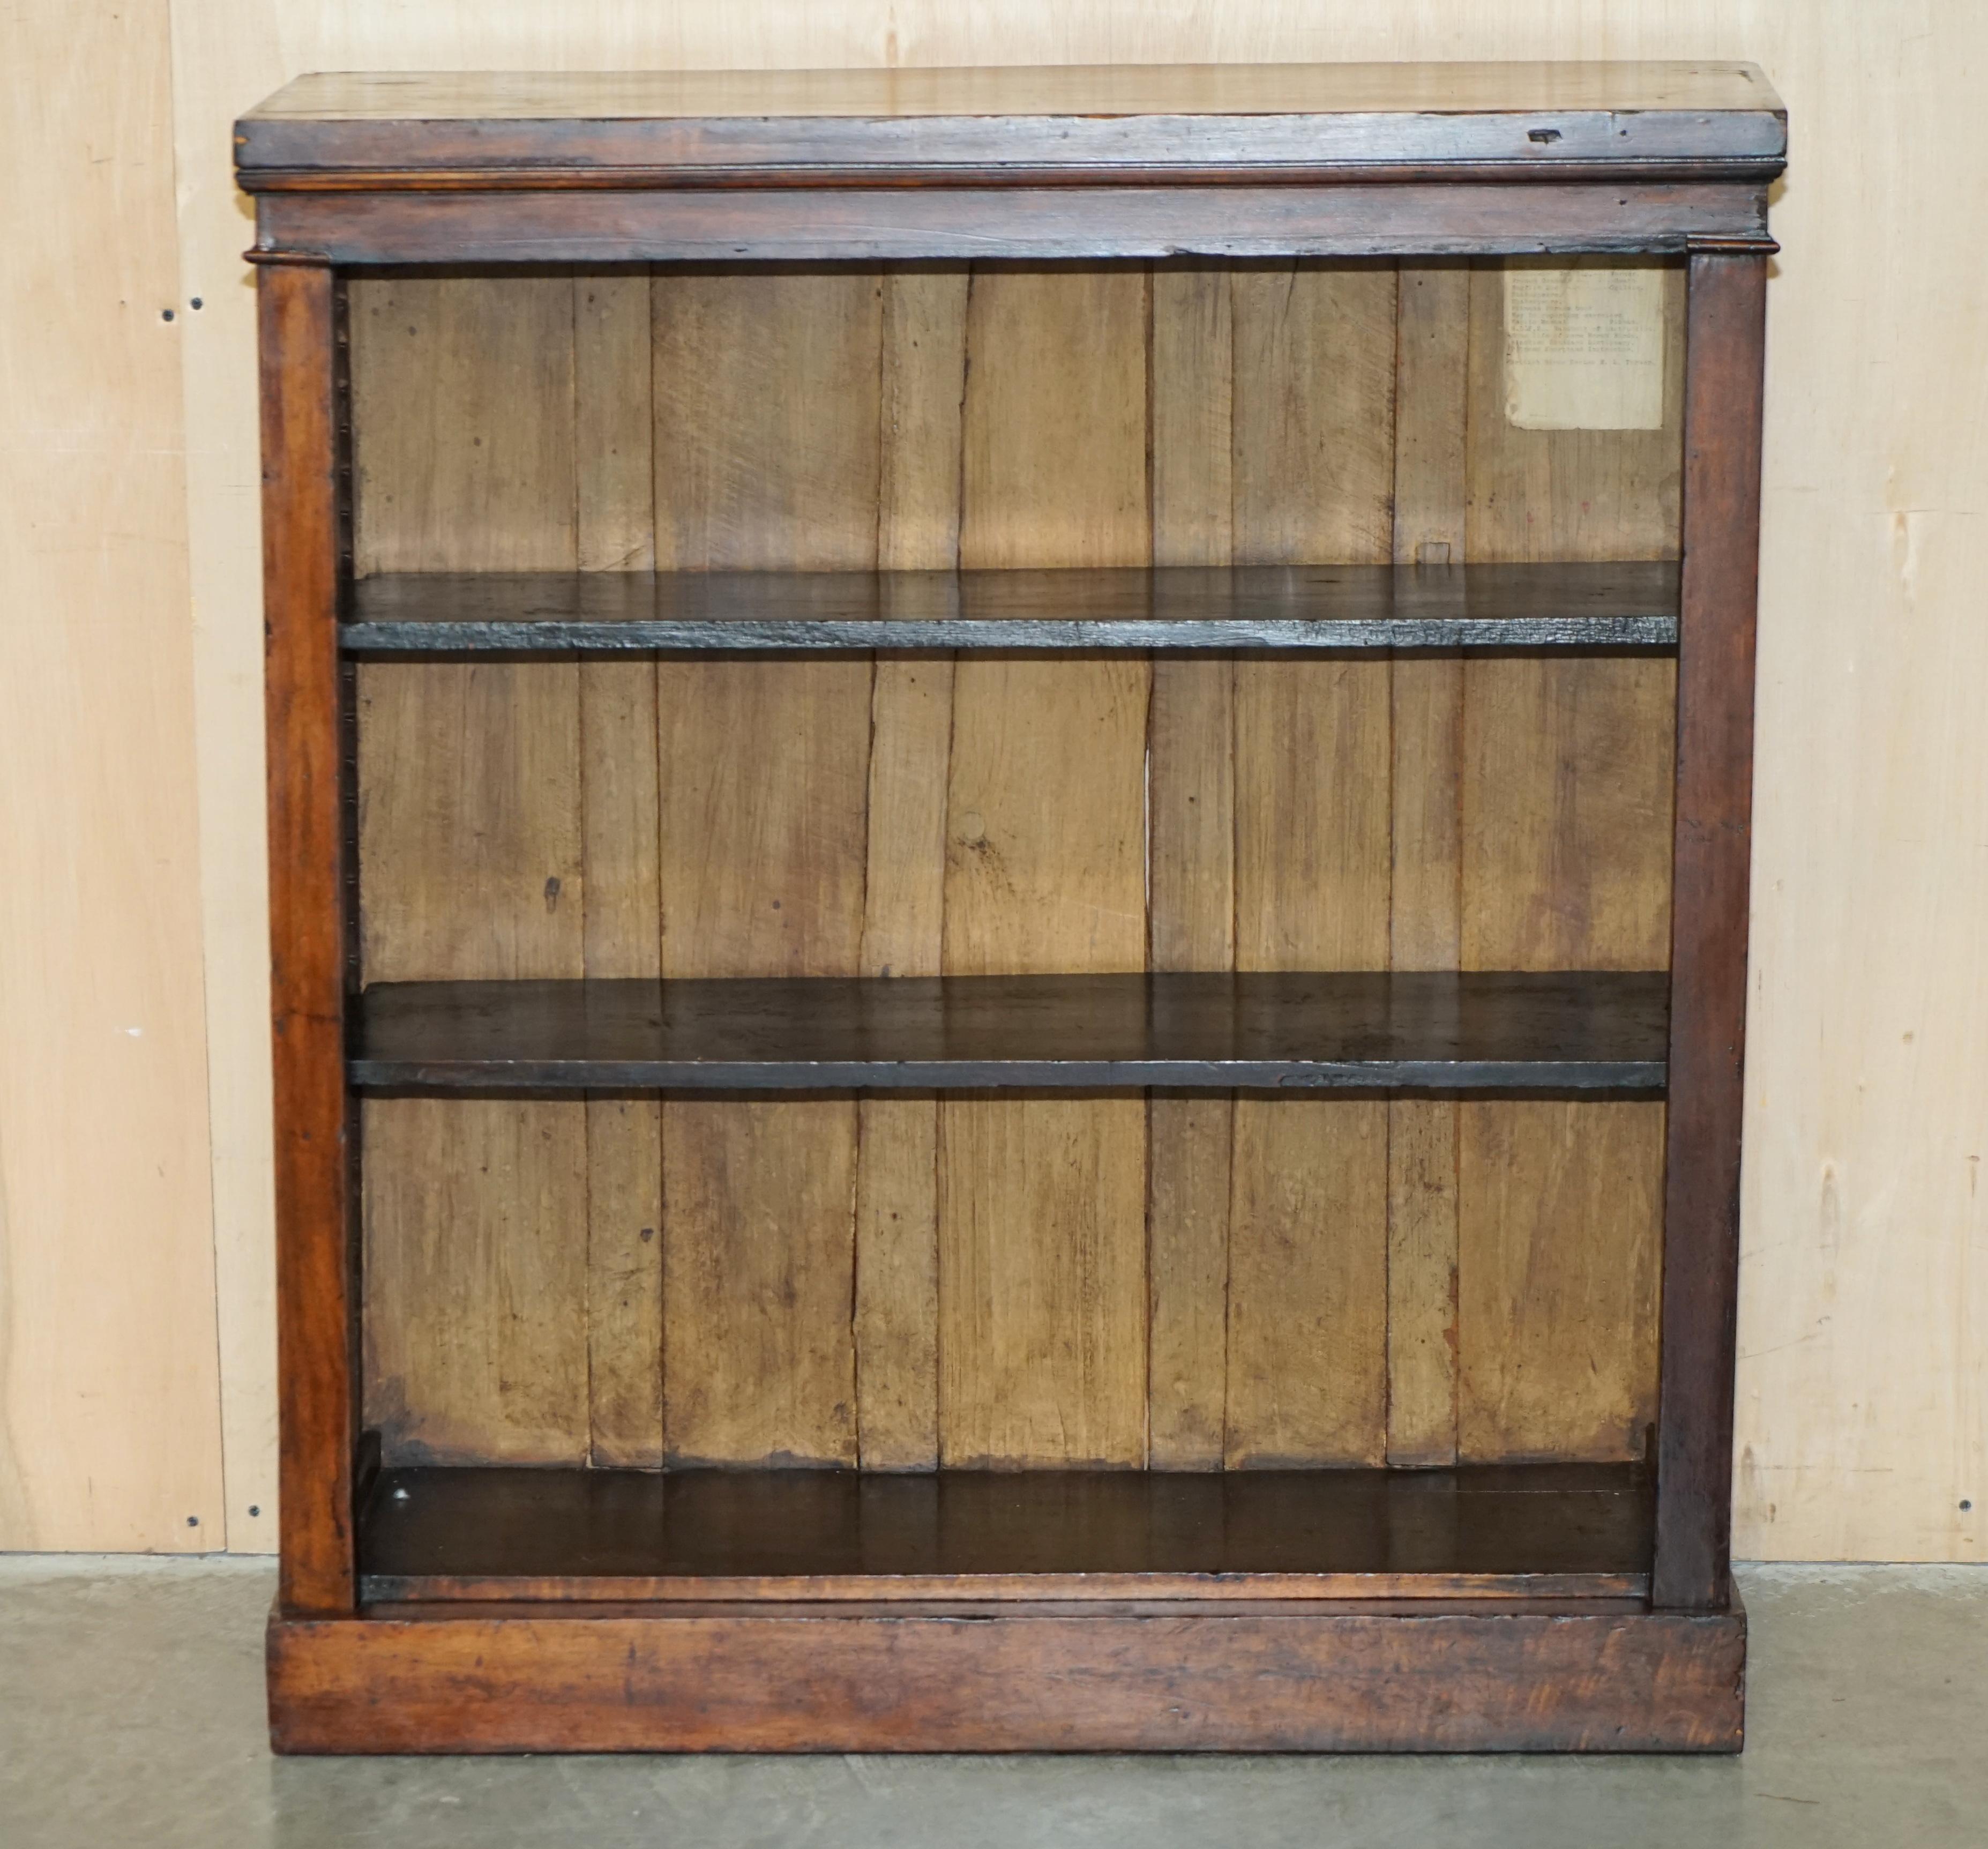 Royal House Antiques

Royal House Antiques is delighted to offer for sale this lovely antique rustic English mahogany bookcase dating to circa 1860 - 1880 with the original finish and height adjustable shelves 

Please note the delivery fee listed